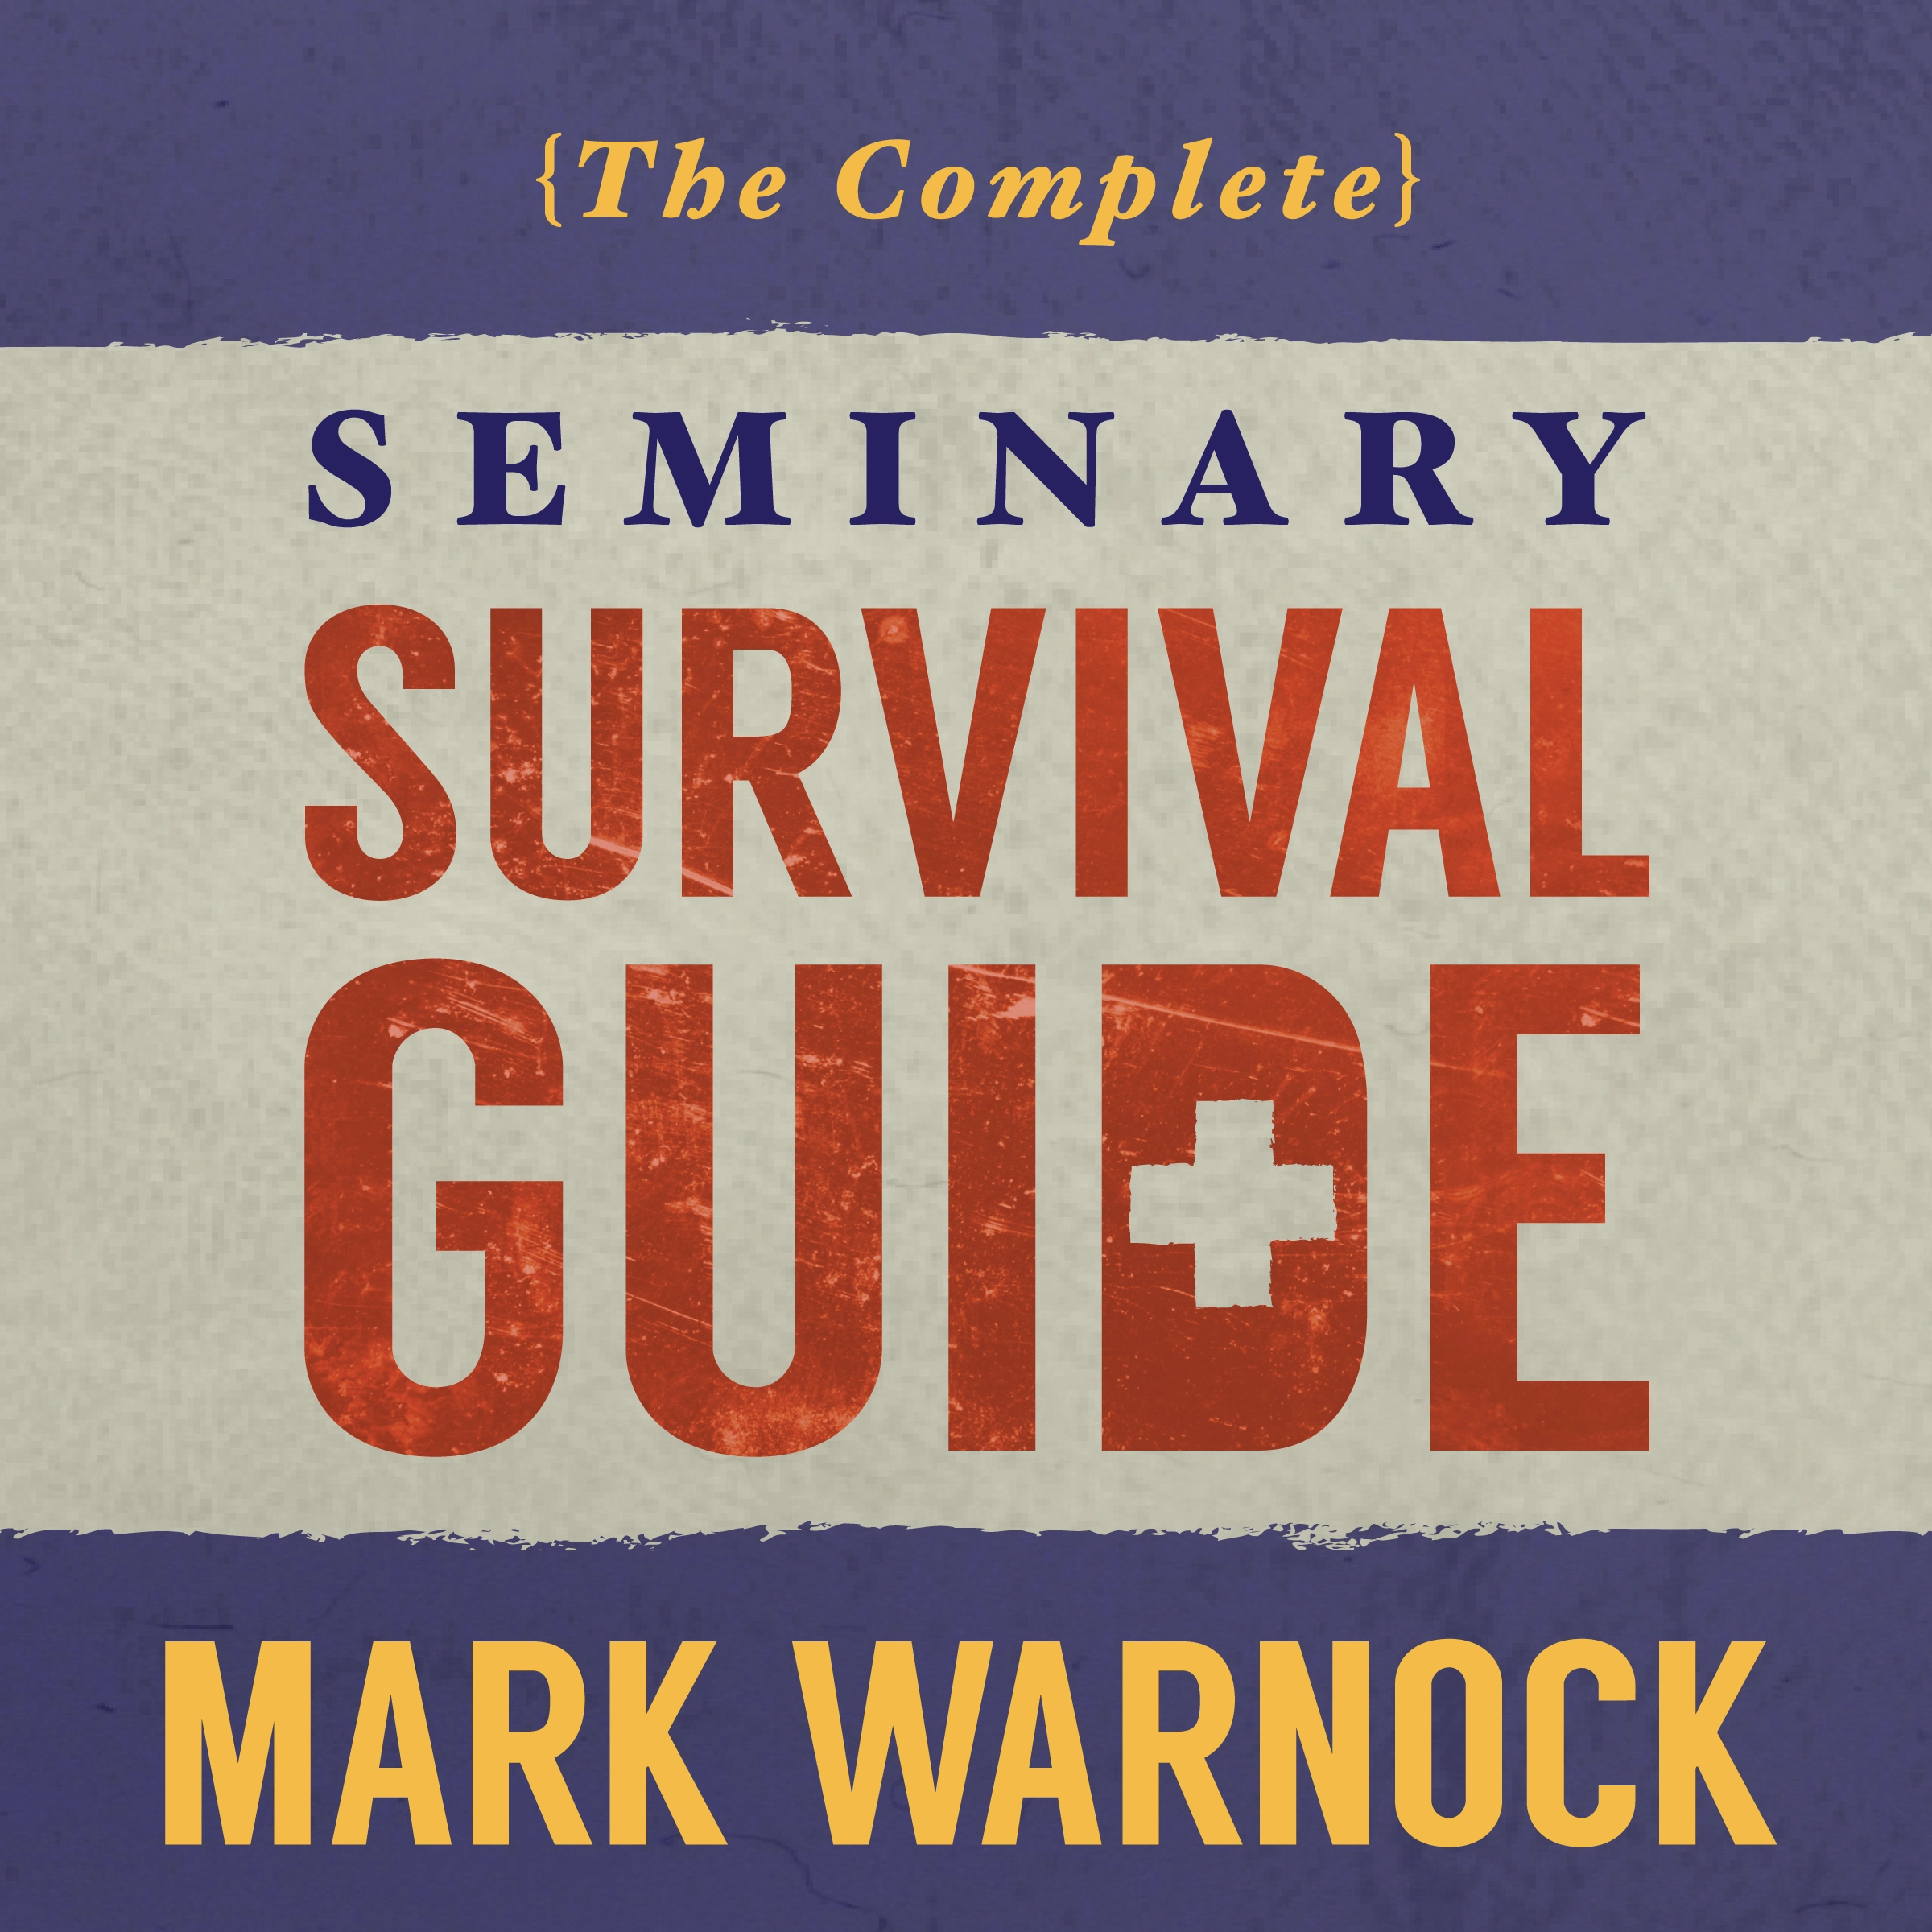 The Complete Seminary Survival Guide Audiobook by Mark Warnock